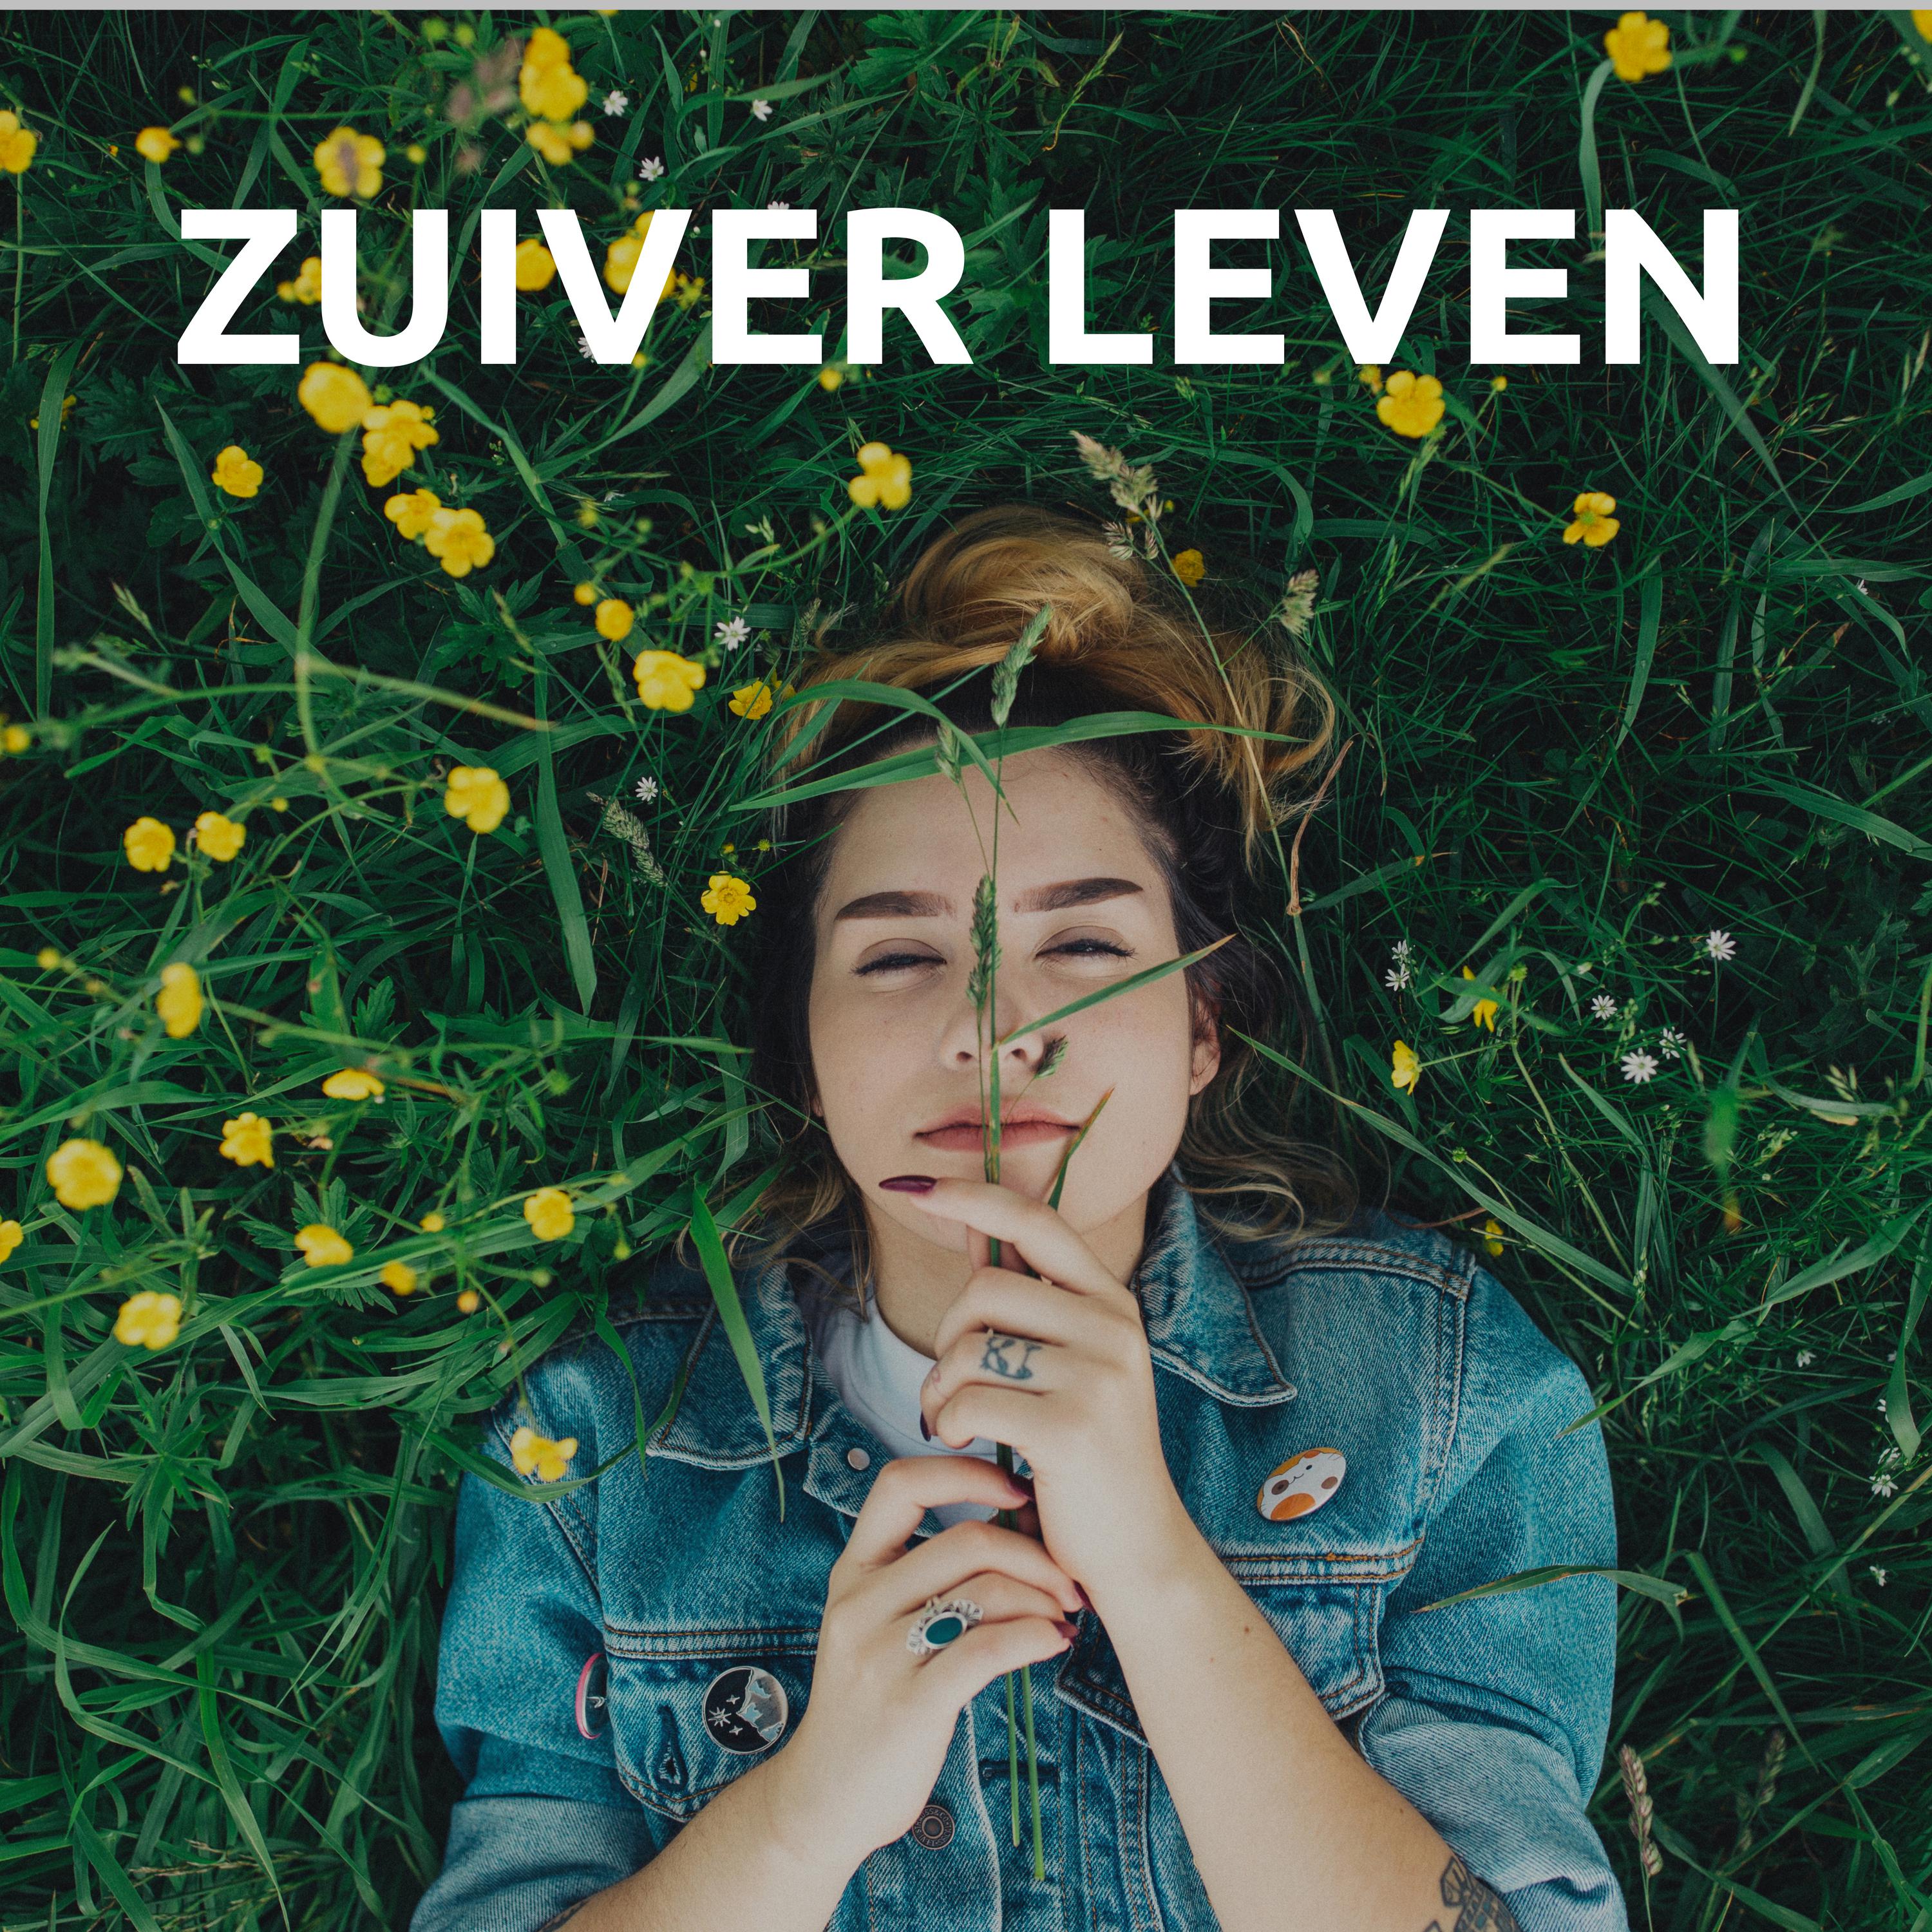 Zuiver leven